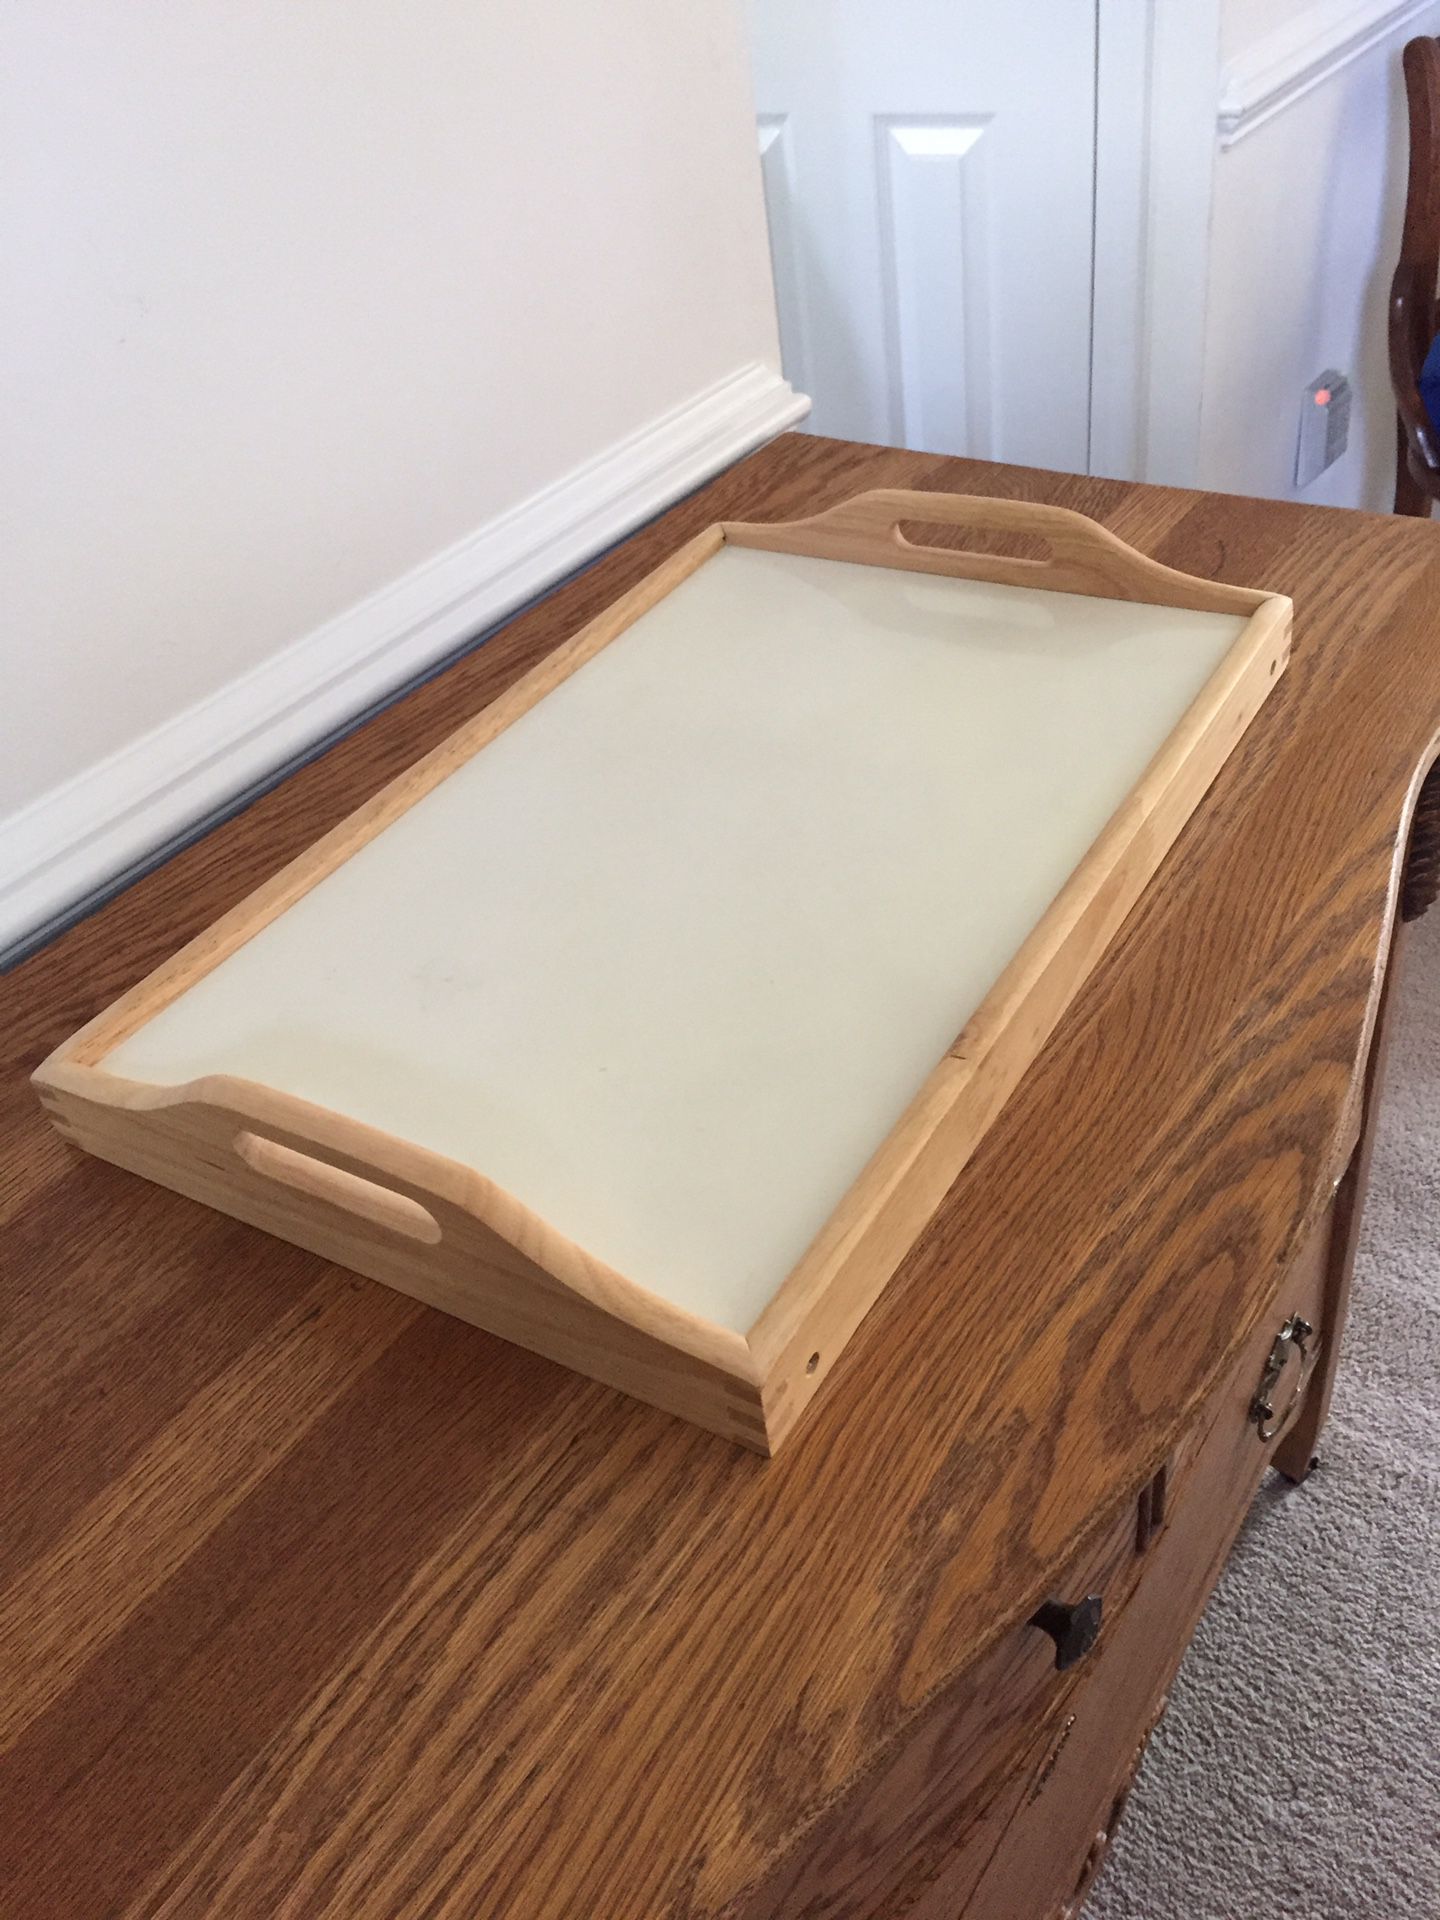 Collapsible tray